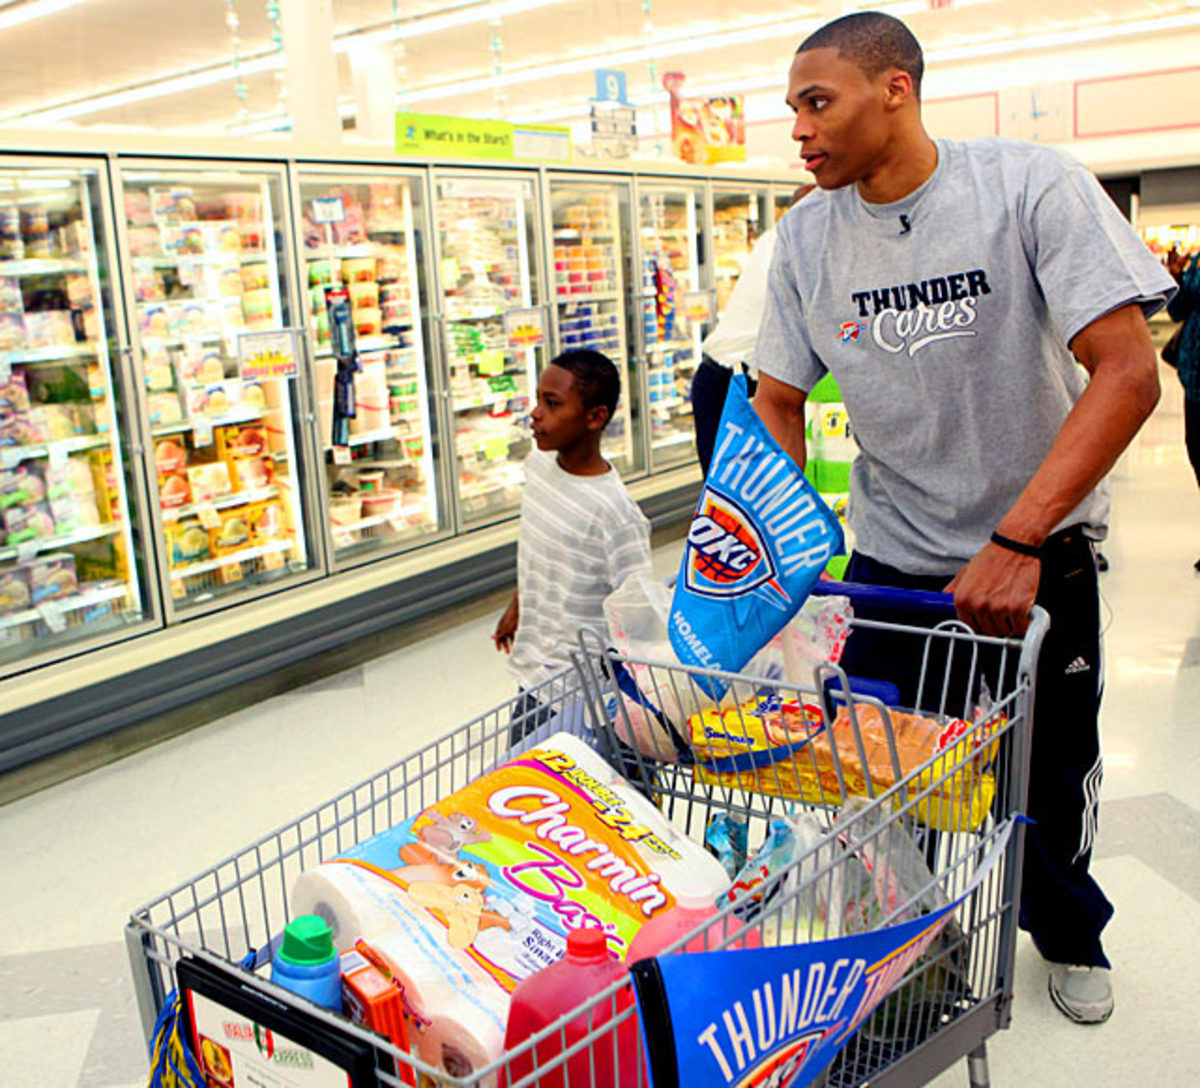 Rare Photos of Russell Westbrook - Sports Illustrated